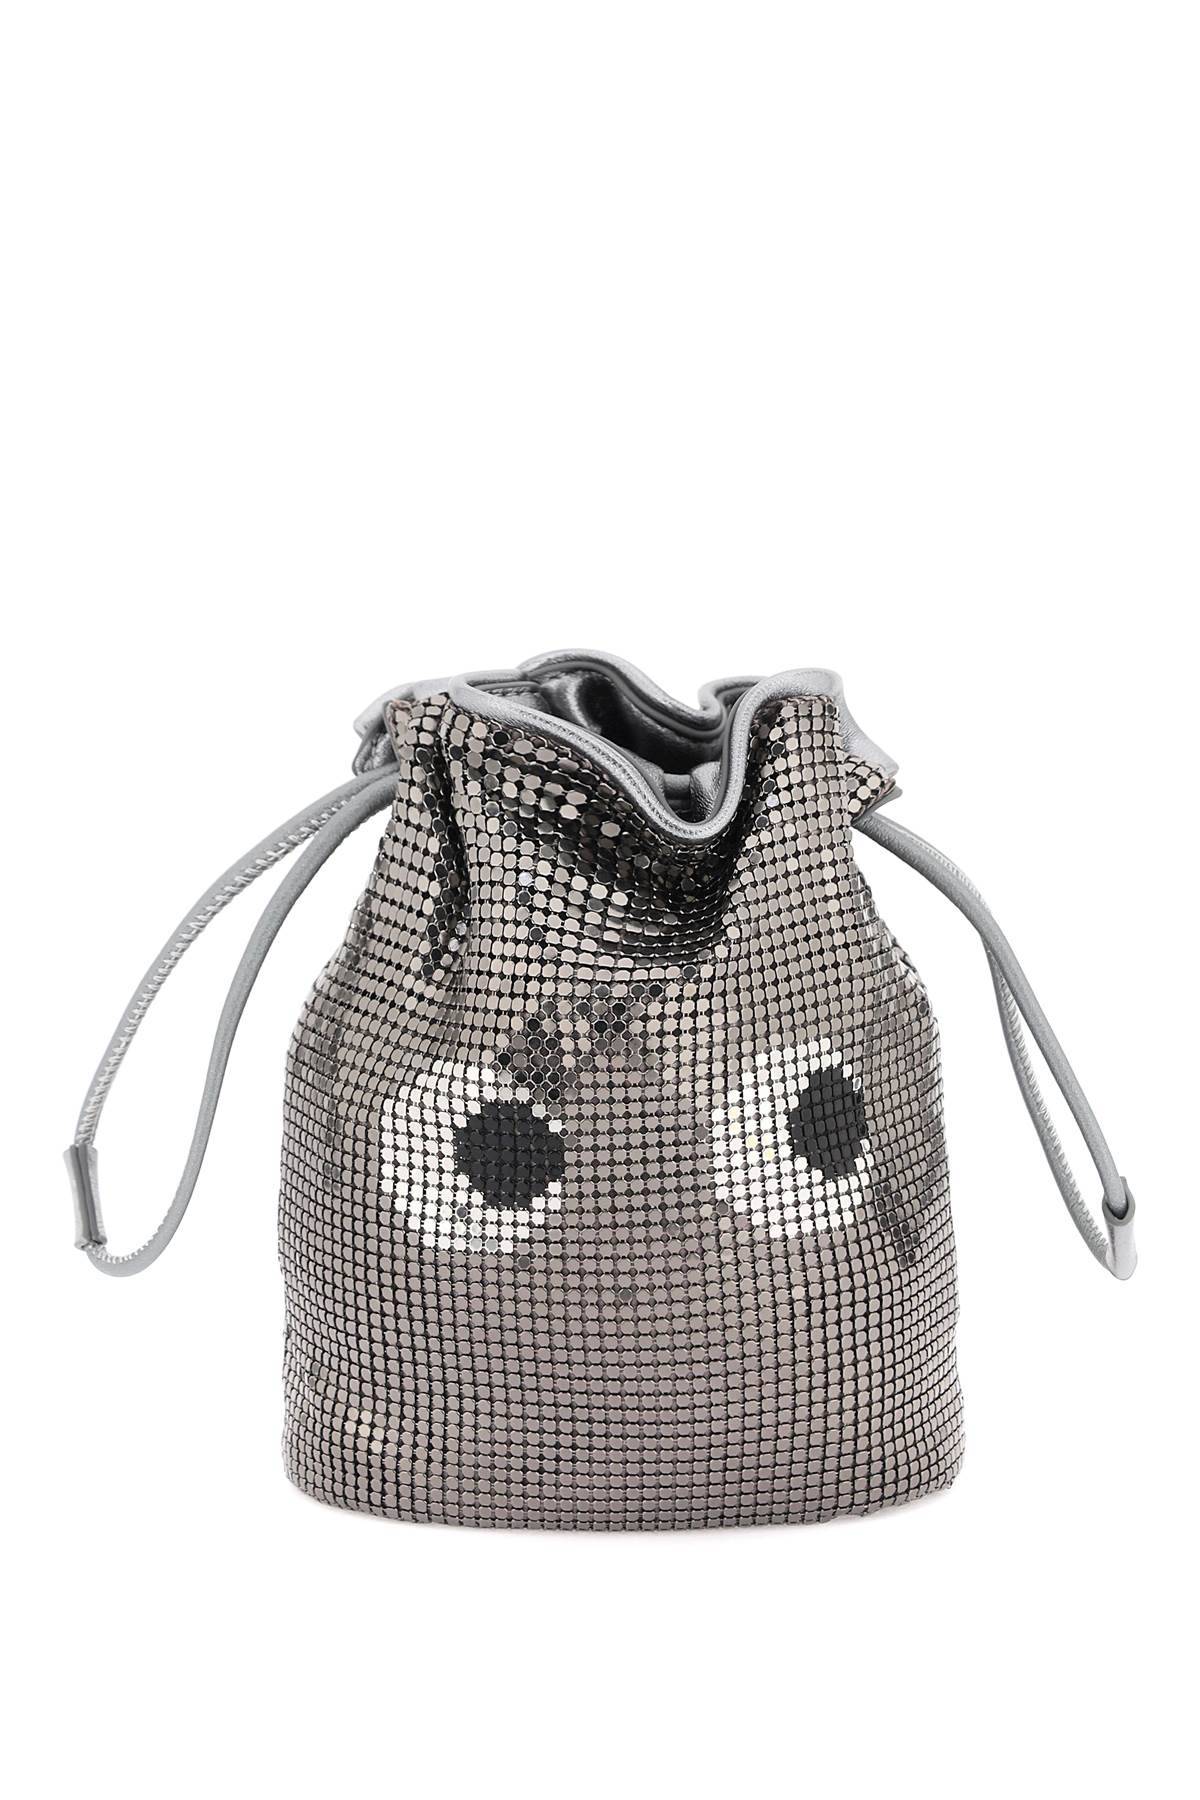 Anya Hindmarch Eyes Chainmail Drawstring Pouch In Metallic,silver